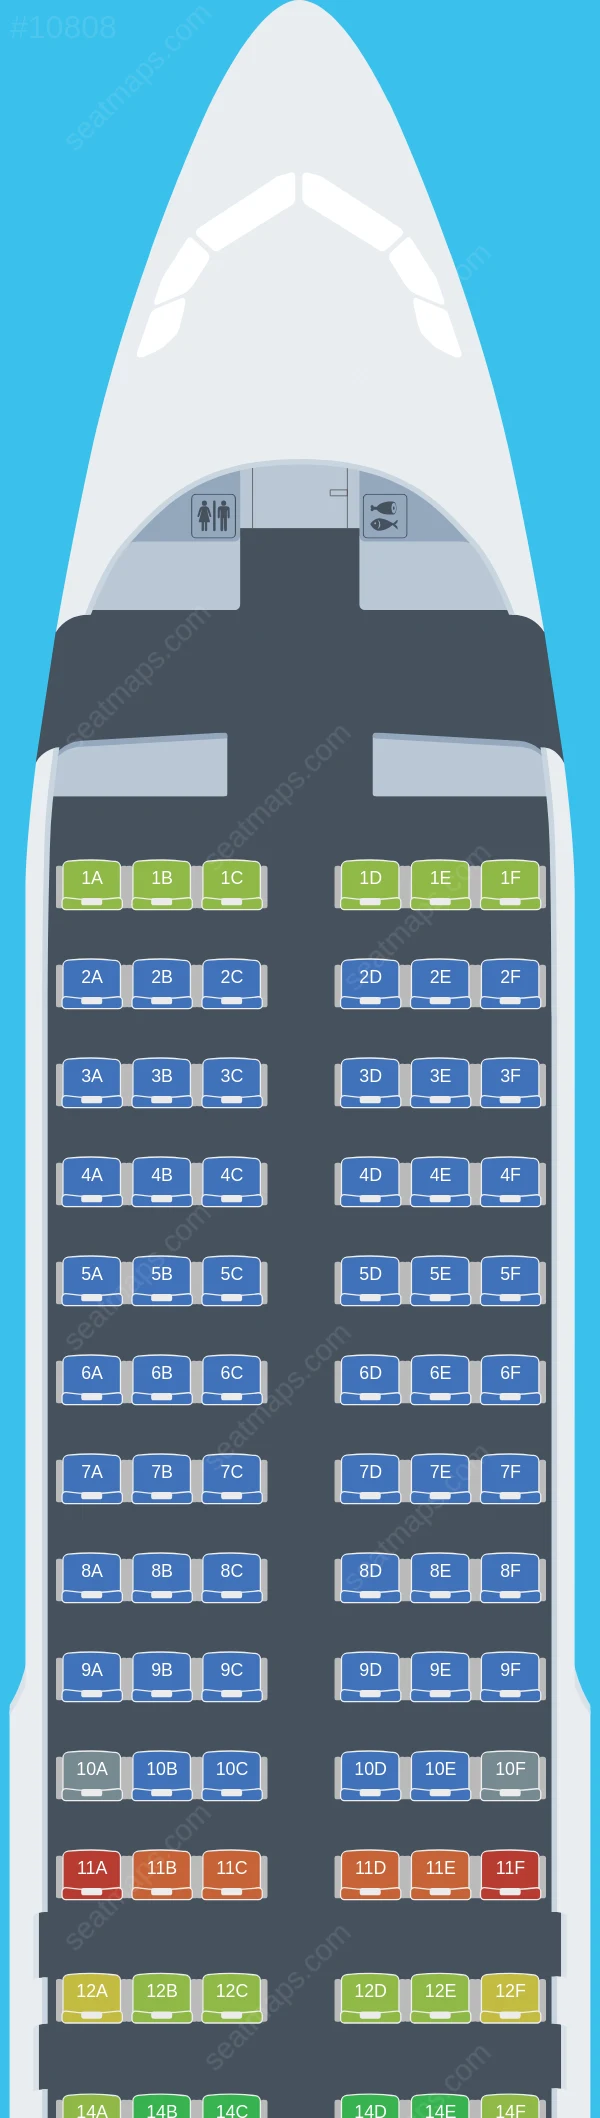 JetSMART Airbus A320neo seatmap preview